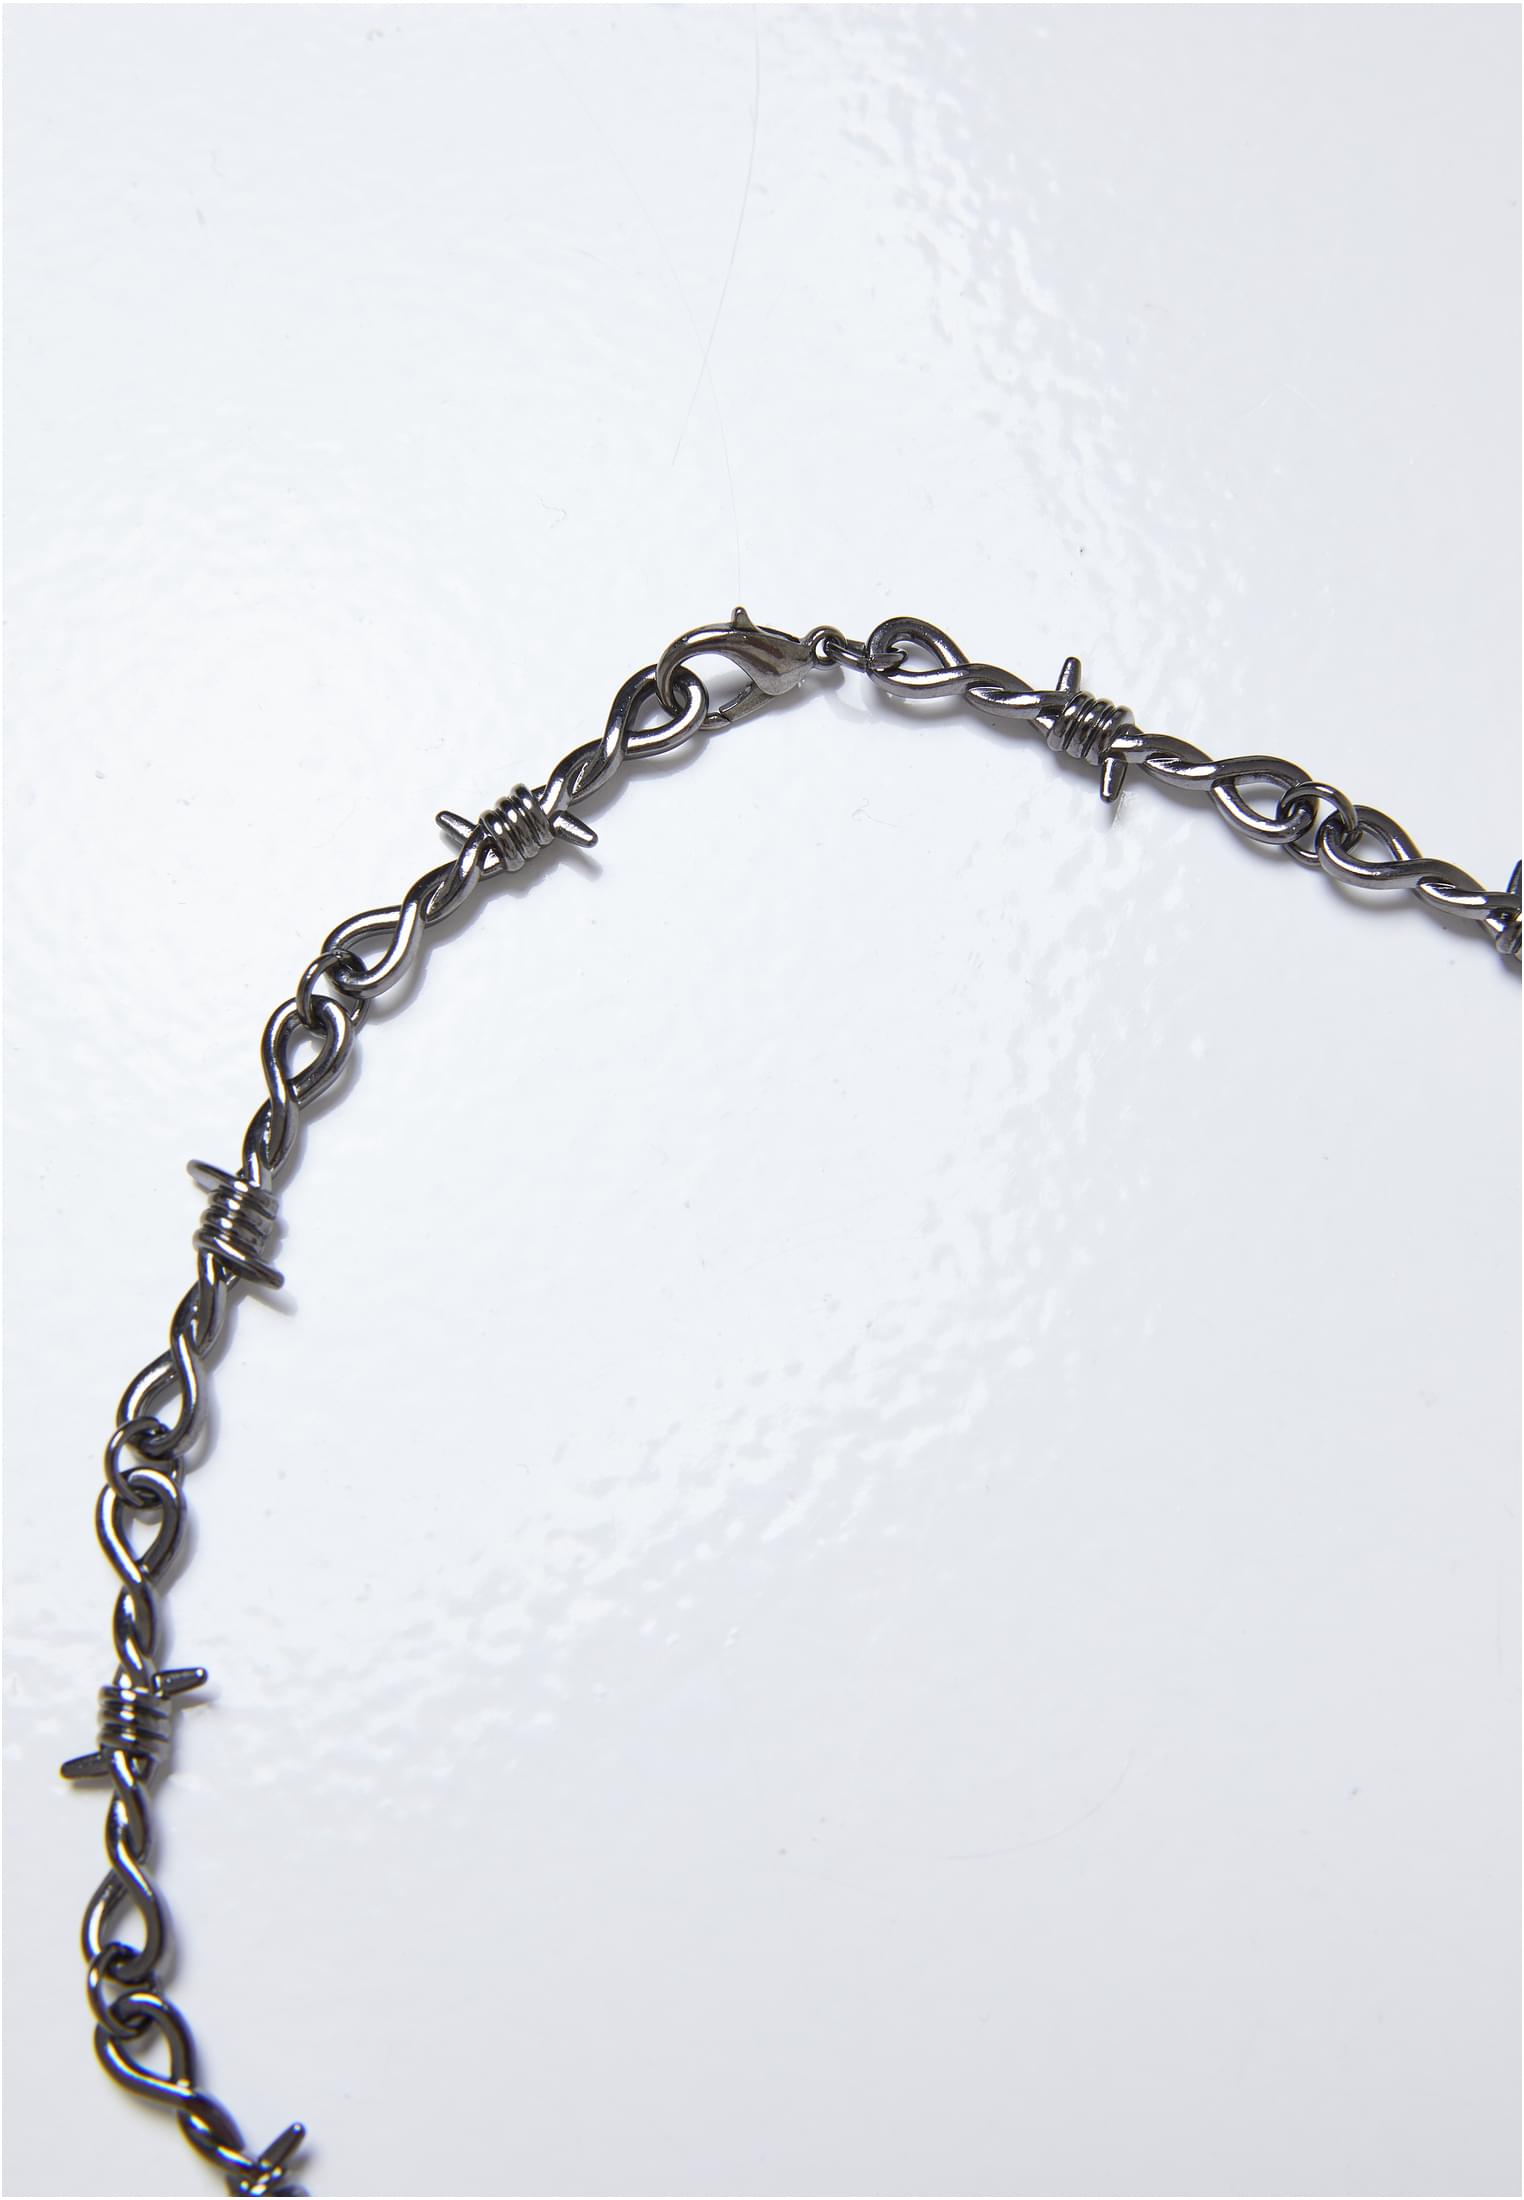 Stainless Steel Barbed Wire Necklace Thick Heavy Thorns Chain Necklace 9mm  Unisex Hip-hop Punk Gothic Cuban Chain Necklace Chokers for Men Women 16  inch | Amazon.com